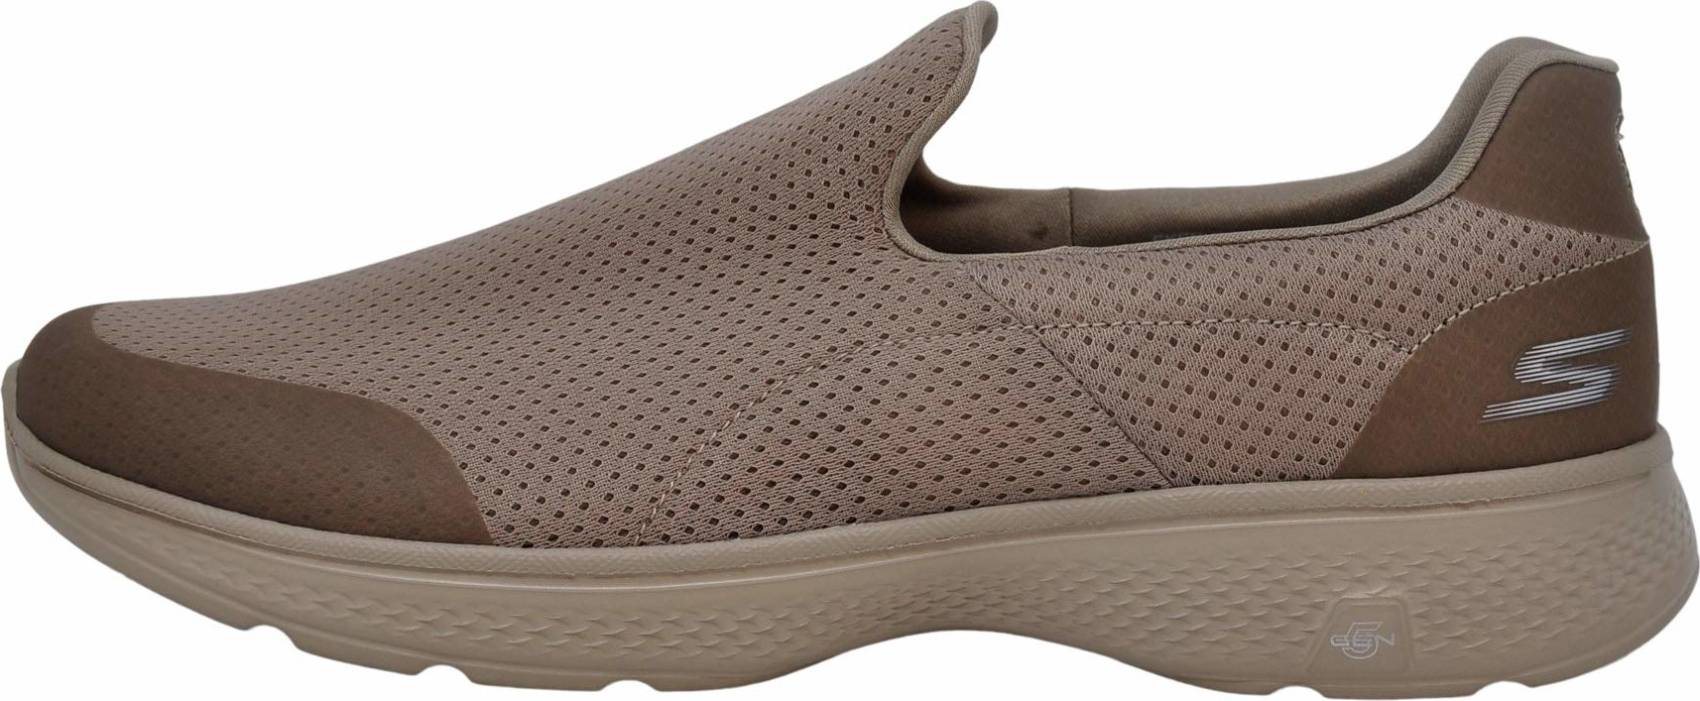 Save 36% on Lightweight Walking Shoes 